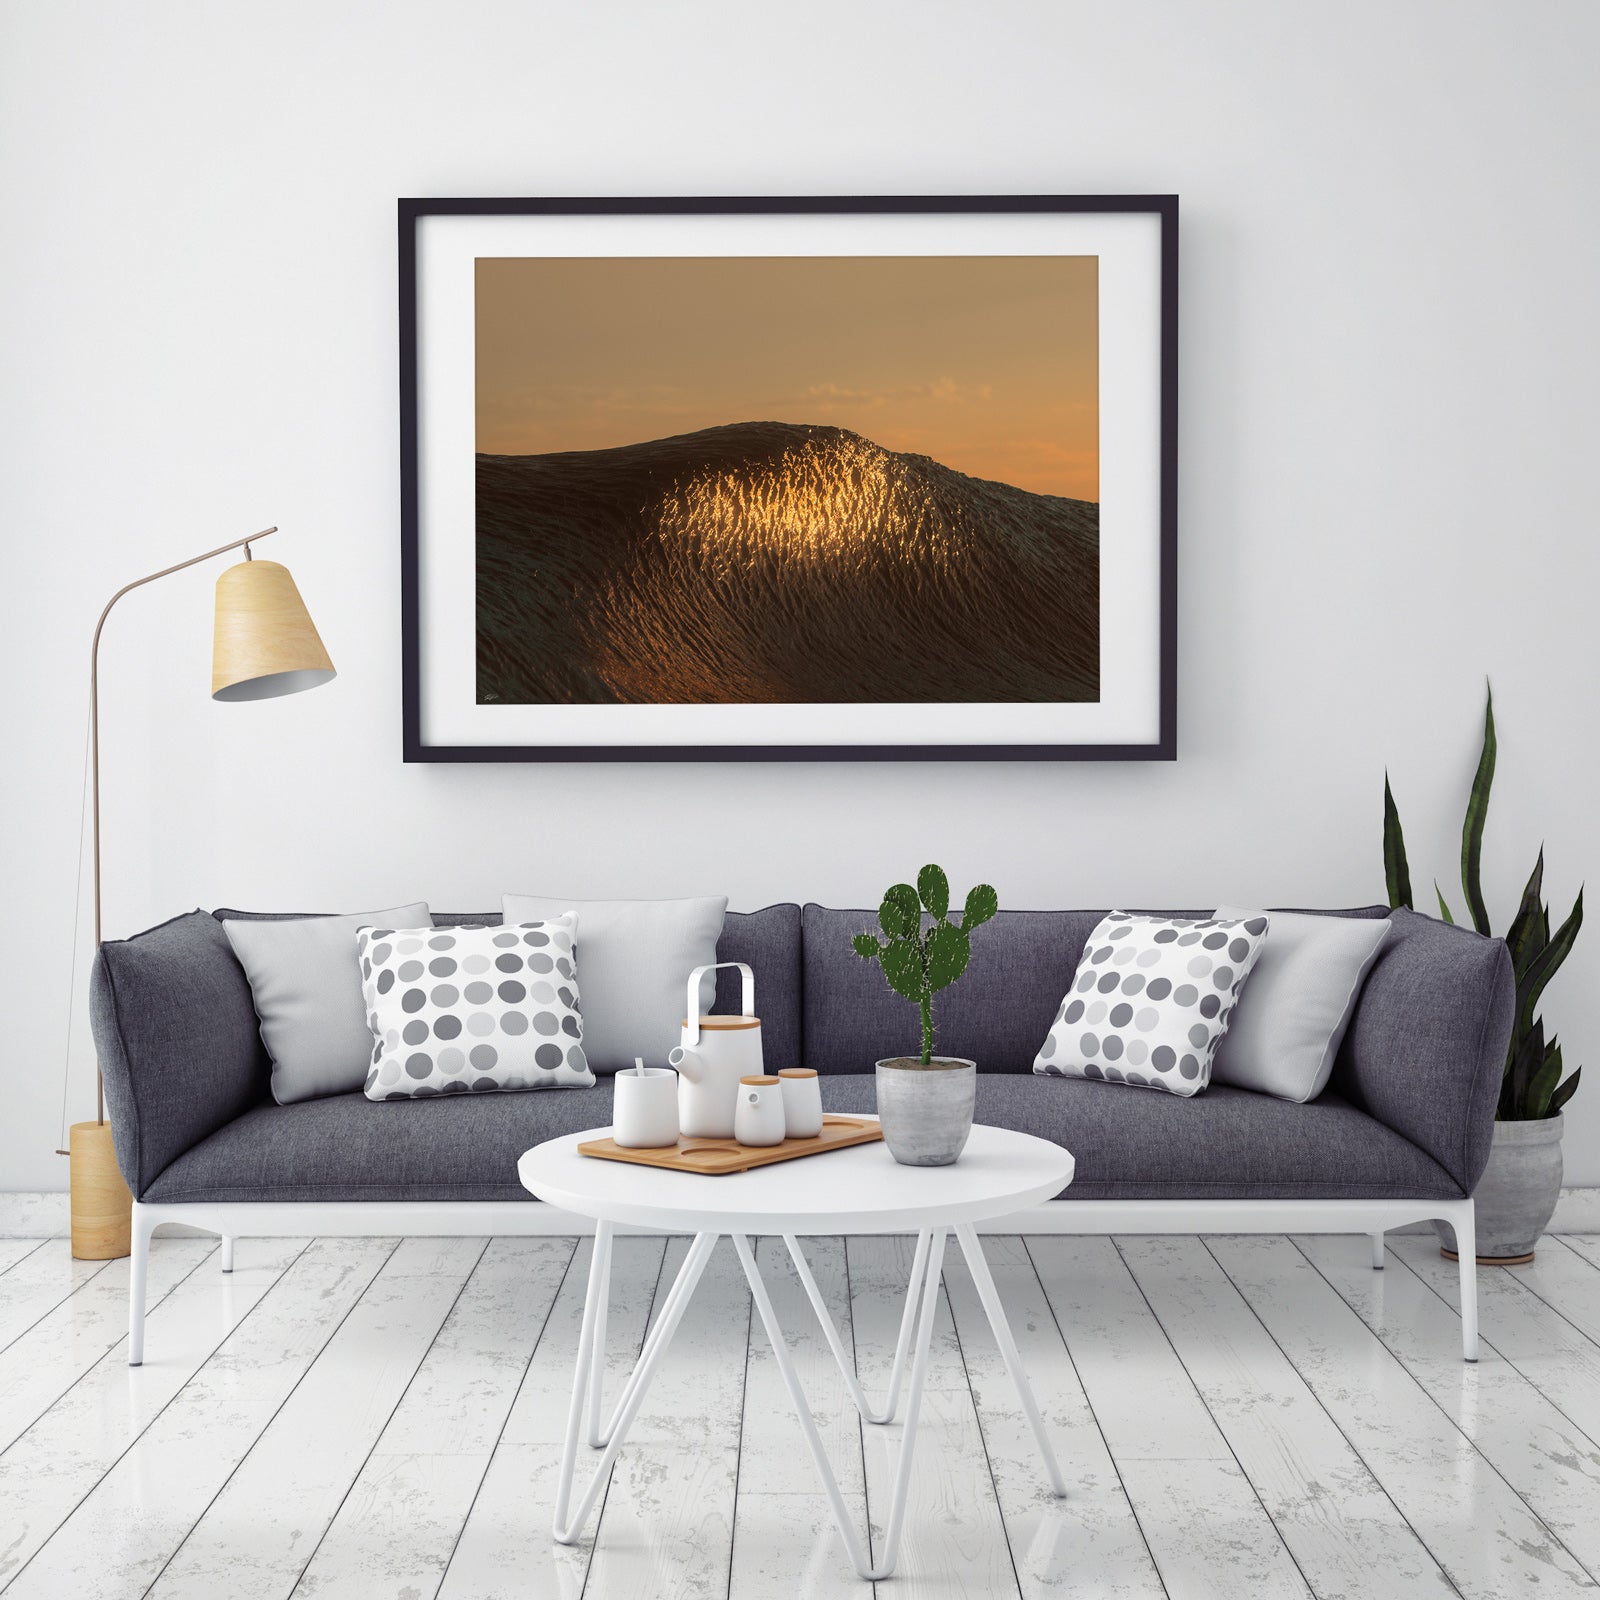 Leopard Mountain - Ocean Art Surf Photography and print